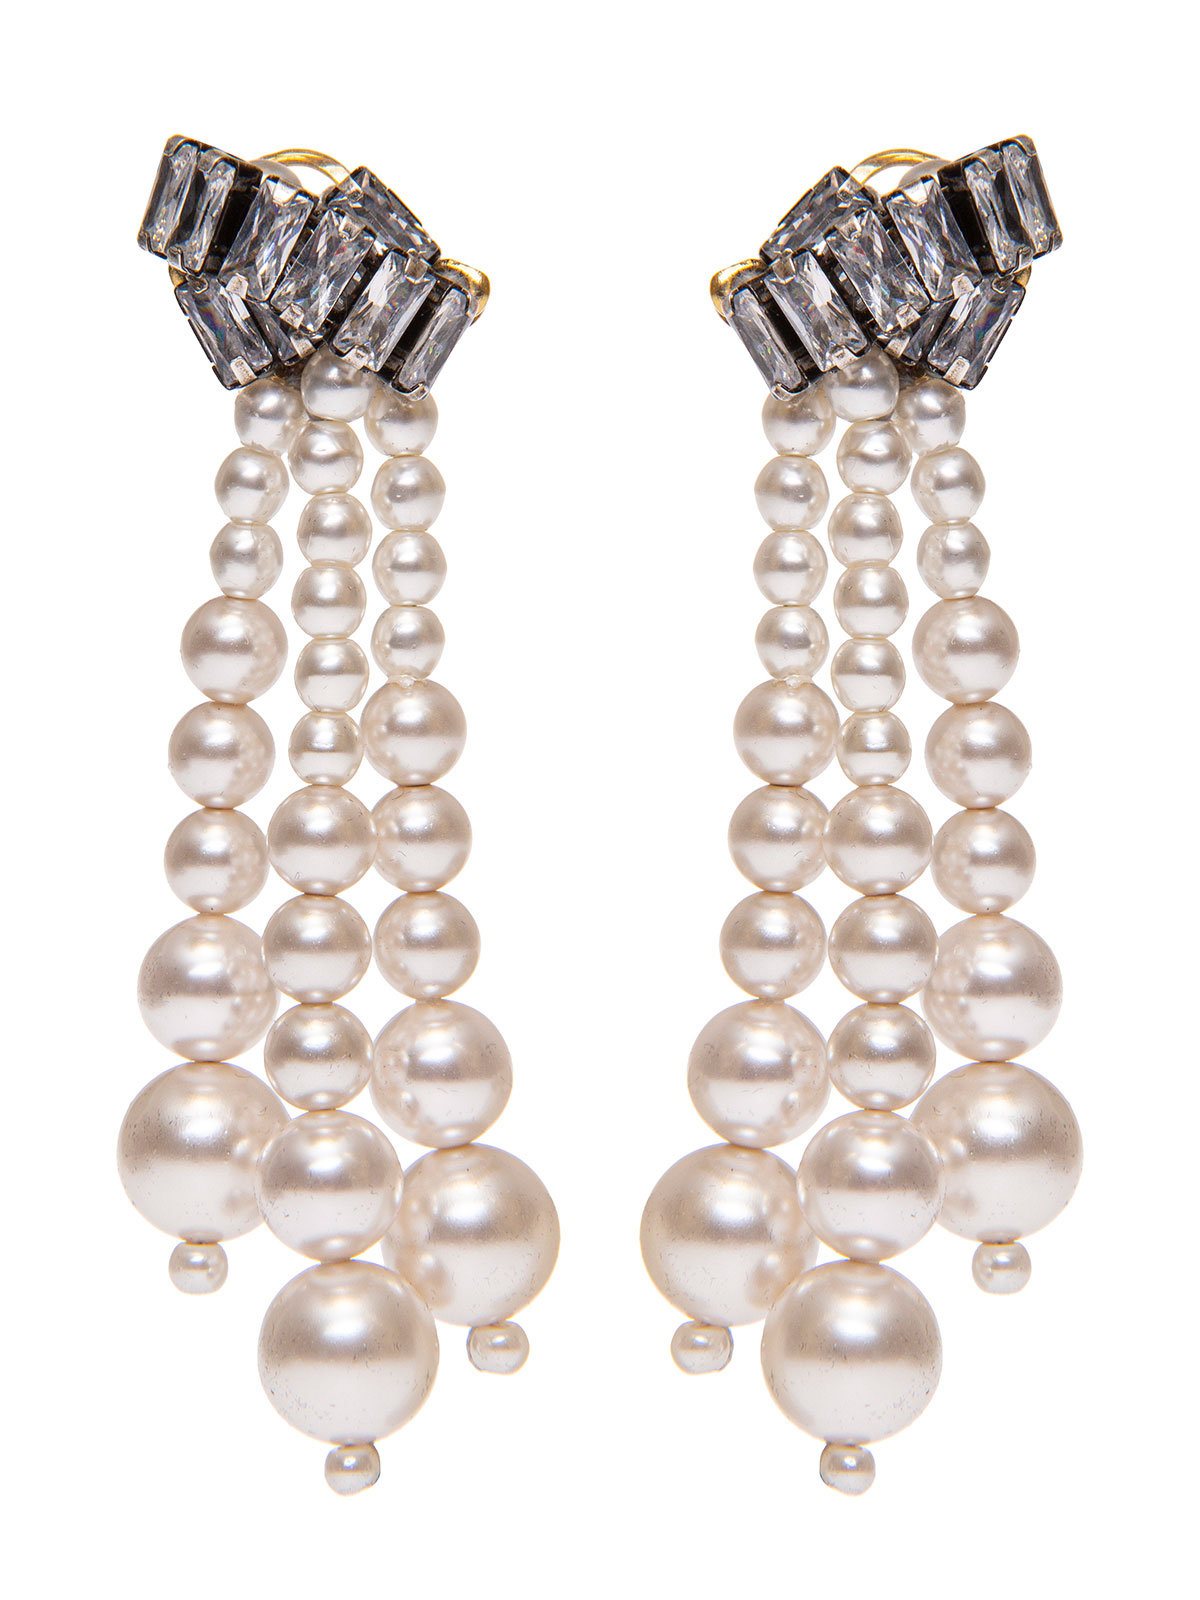 Crystal earrings with pendent pearls